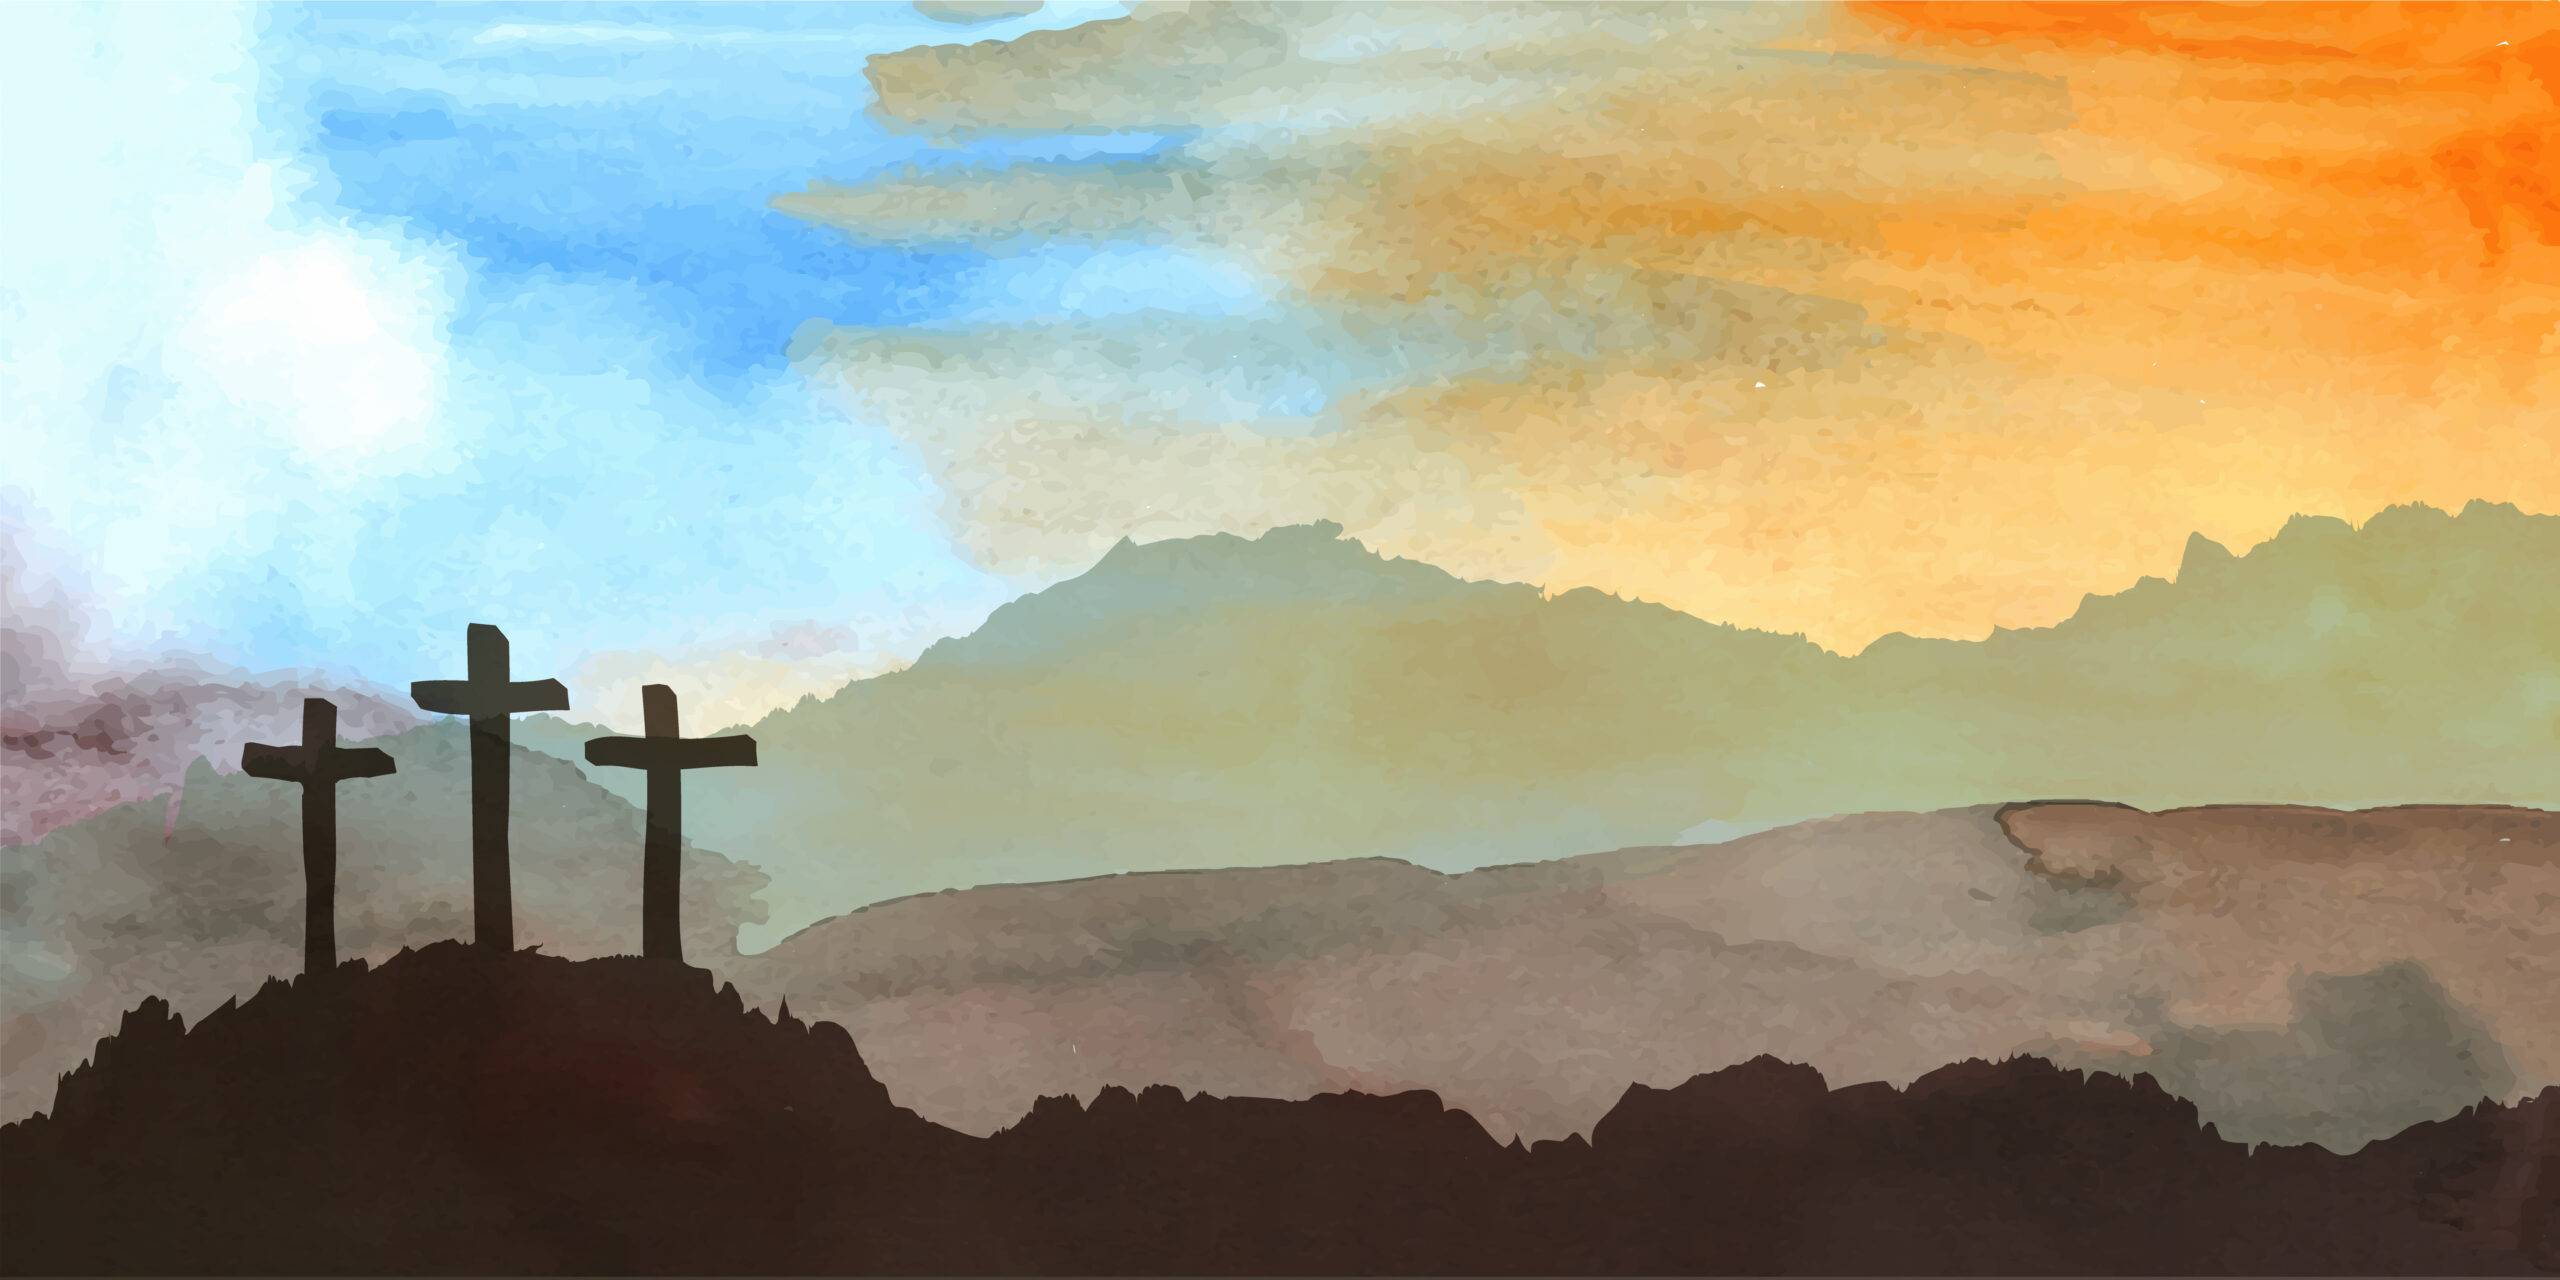 graphicstock watercolor vector illustration hand drawn easter scene with cross jesus christ crucifixion SOMLkMpBzW scaled